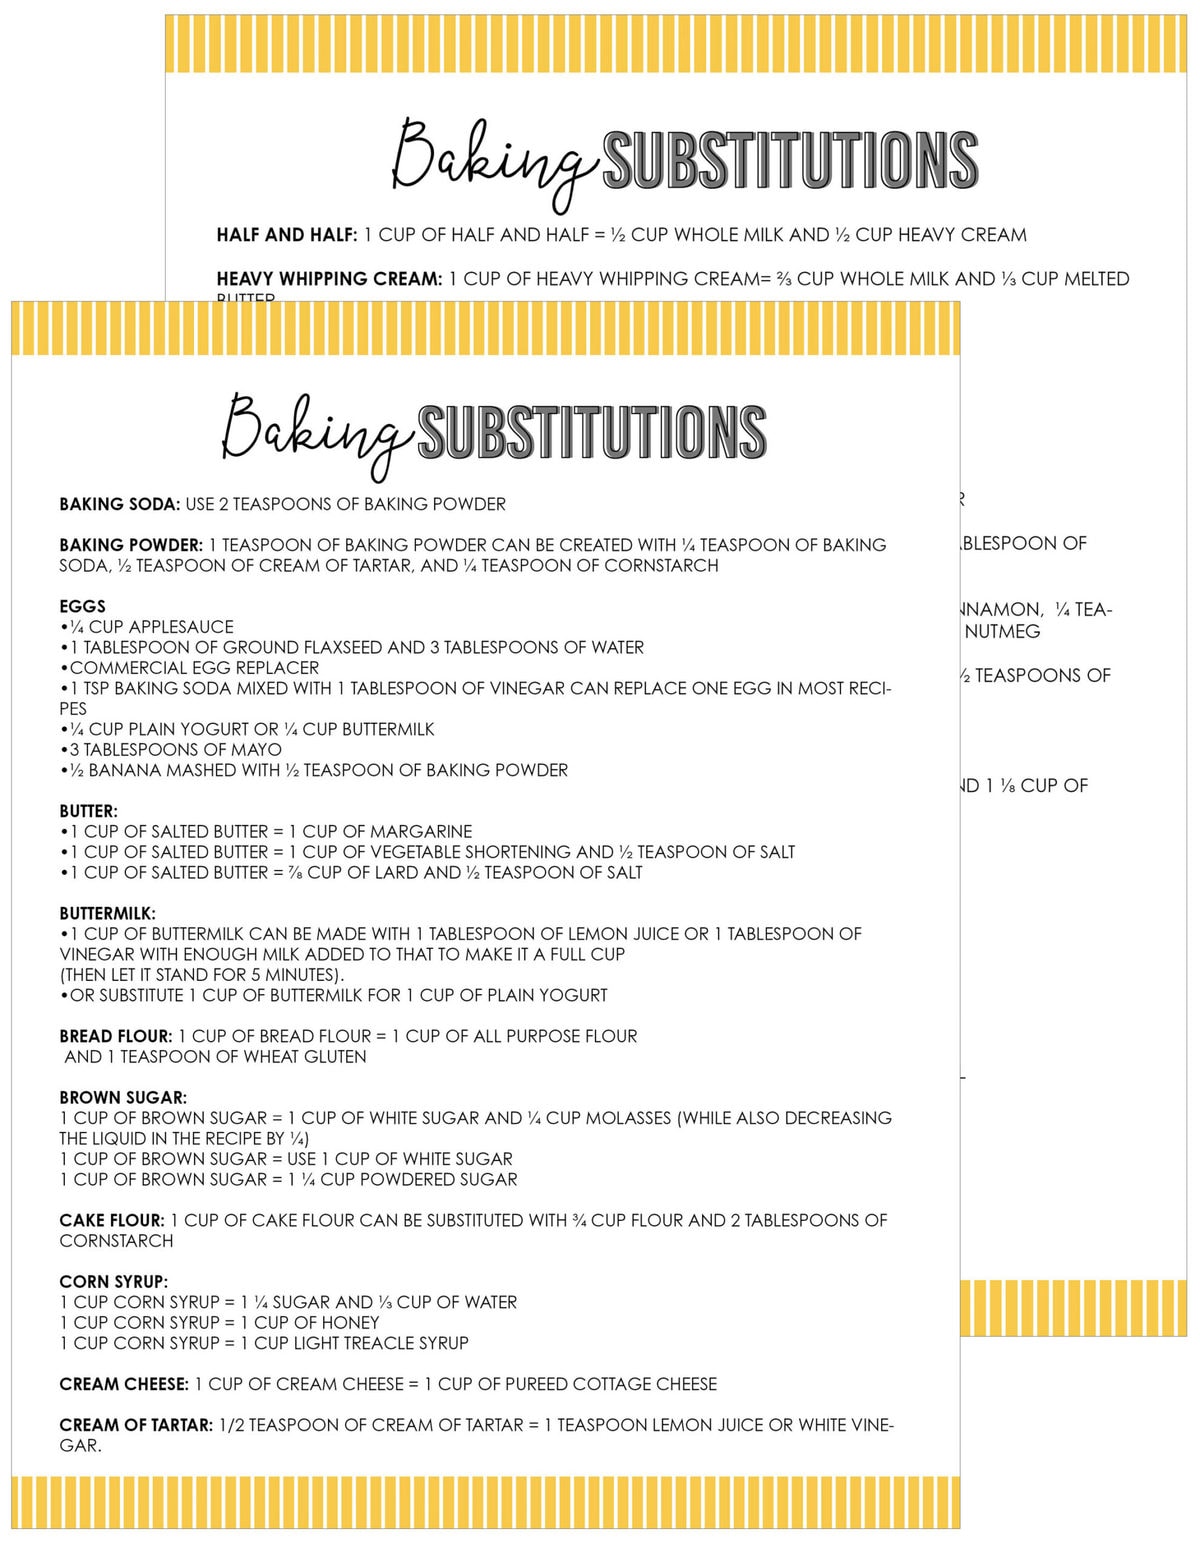 Baking substitutions printable